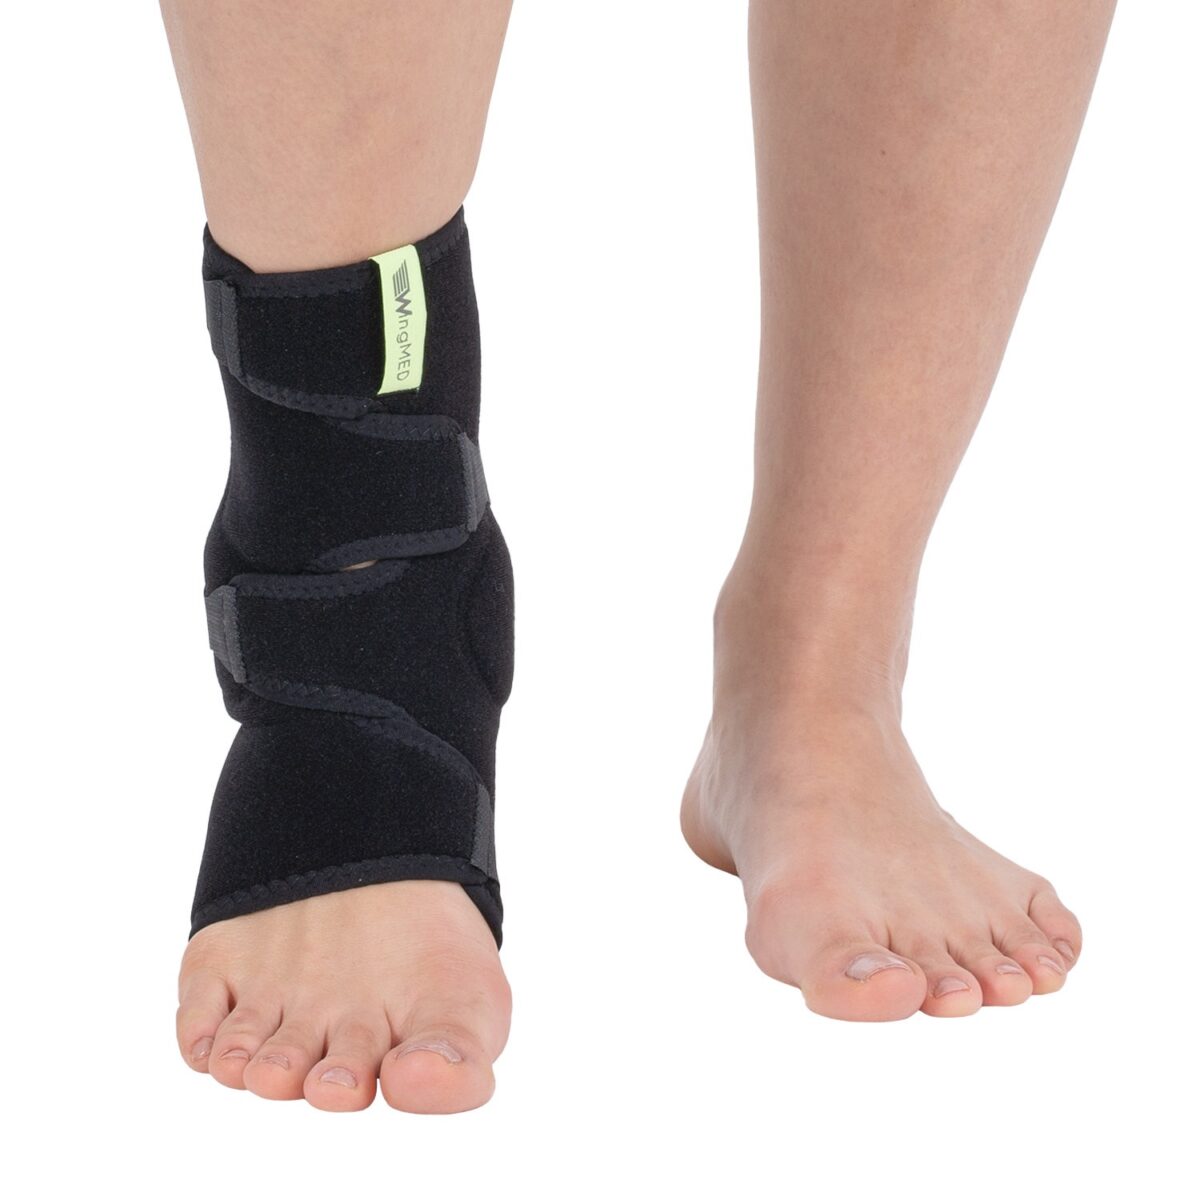 wingmed orthopedic equipments W605 malleol ankle support with 8 strap 69 1